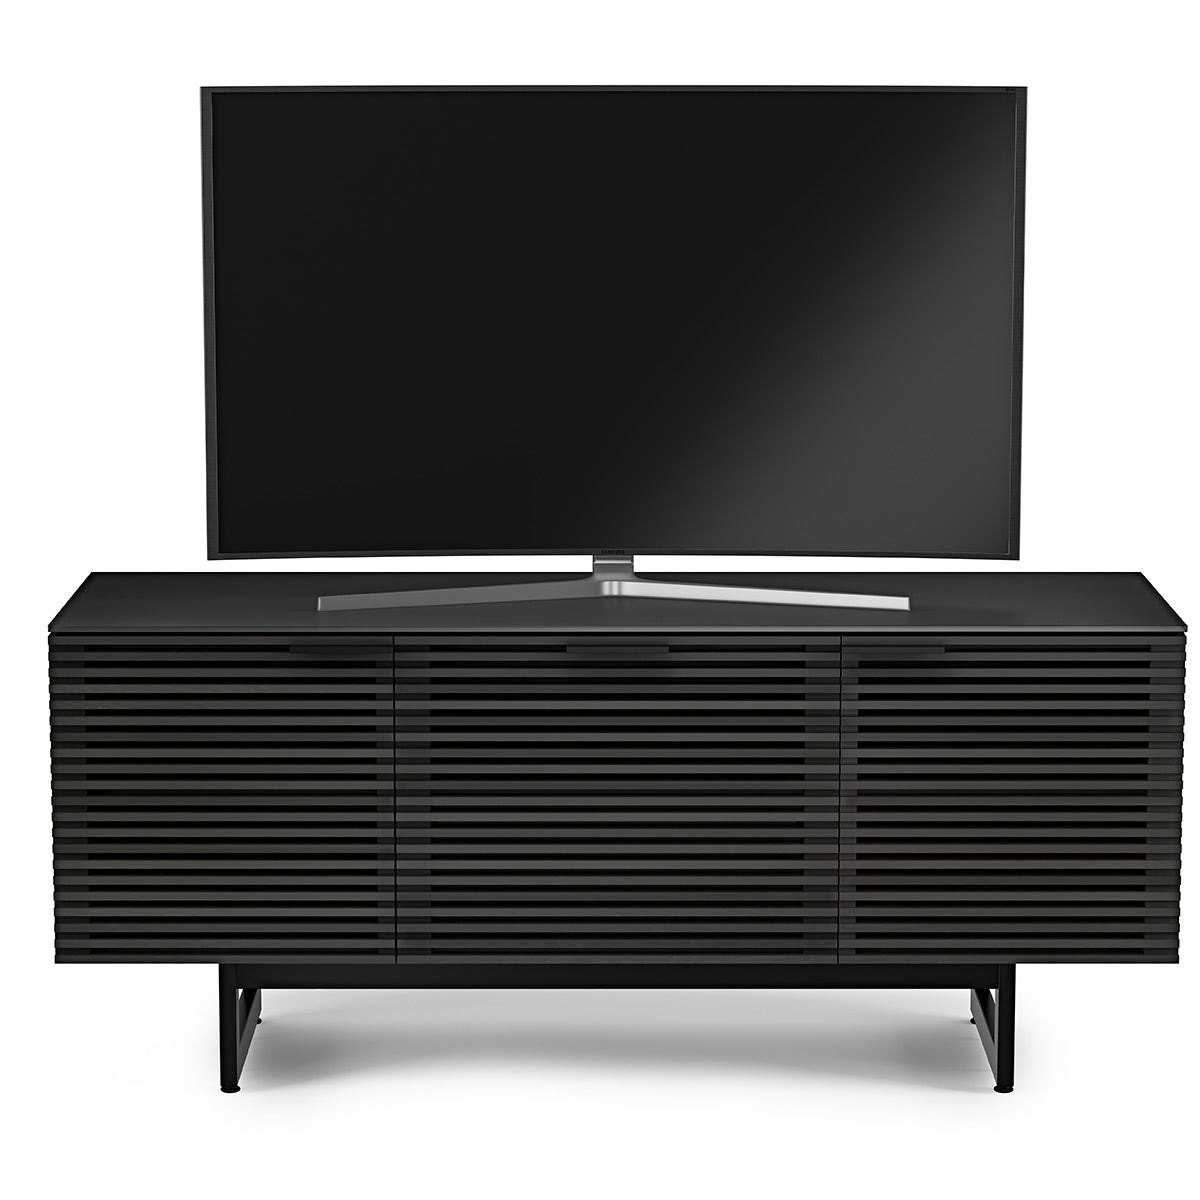 BDI Corridor 8177 Triple Wide Media Console (Charcoal Stained Ash)